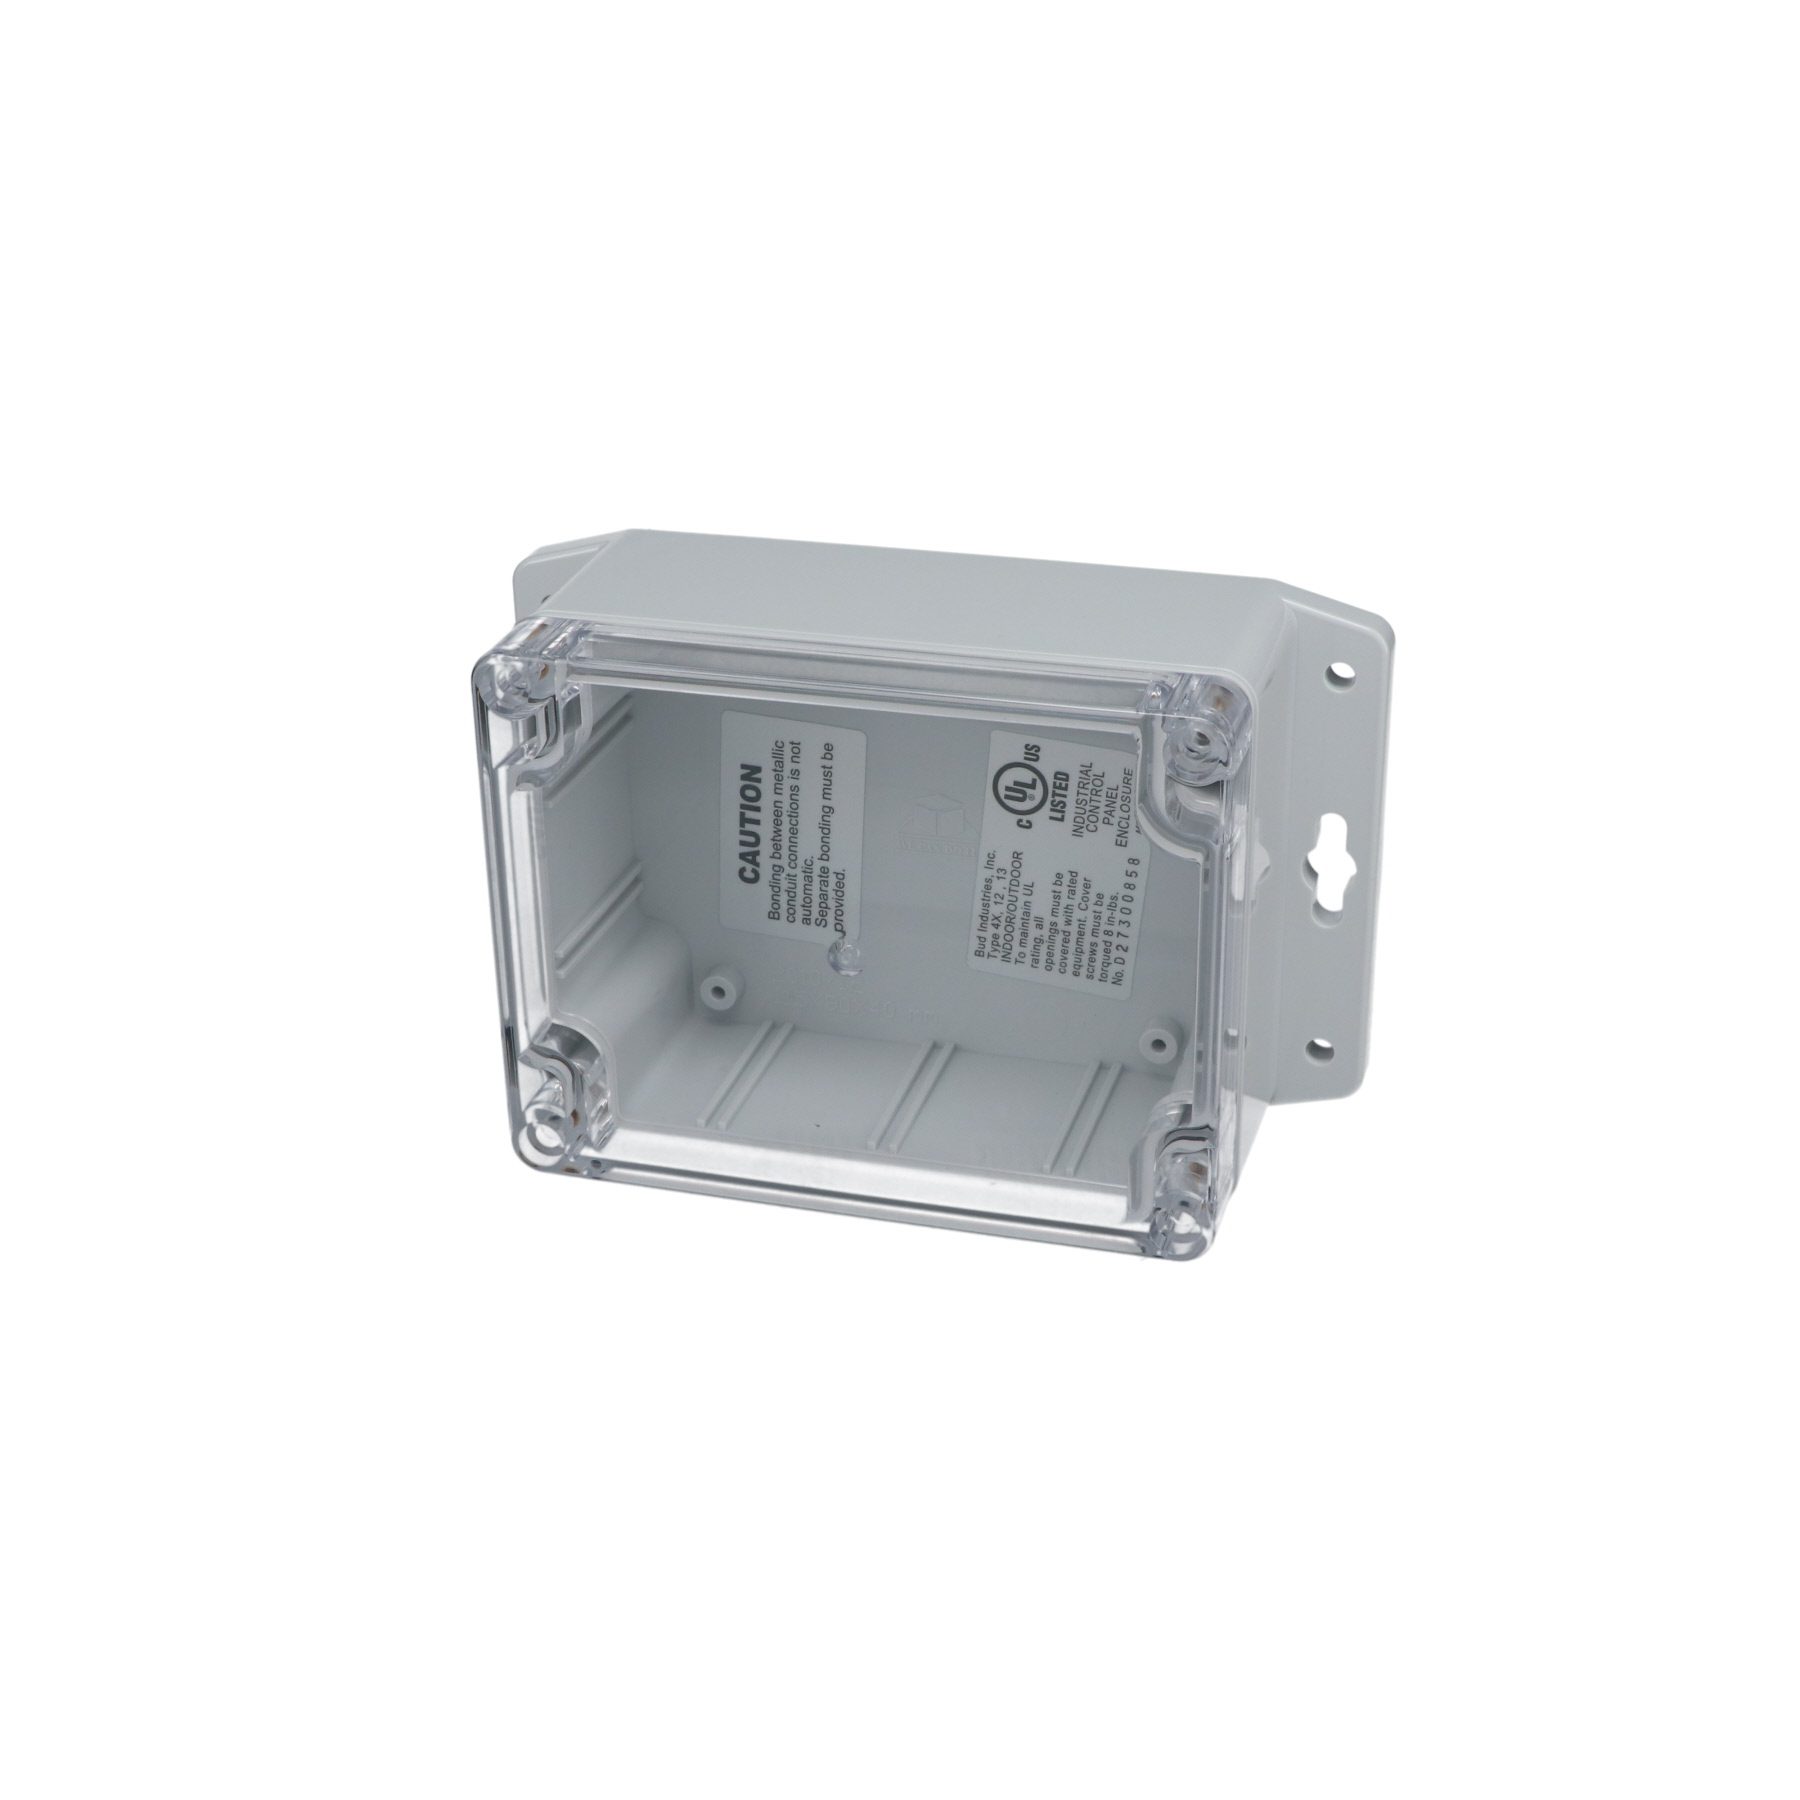 IP65 NEMA 4X Box with Clear Cover and Mounting Brackets PN-1323-CMB